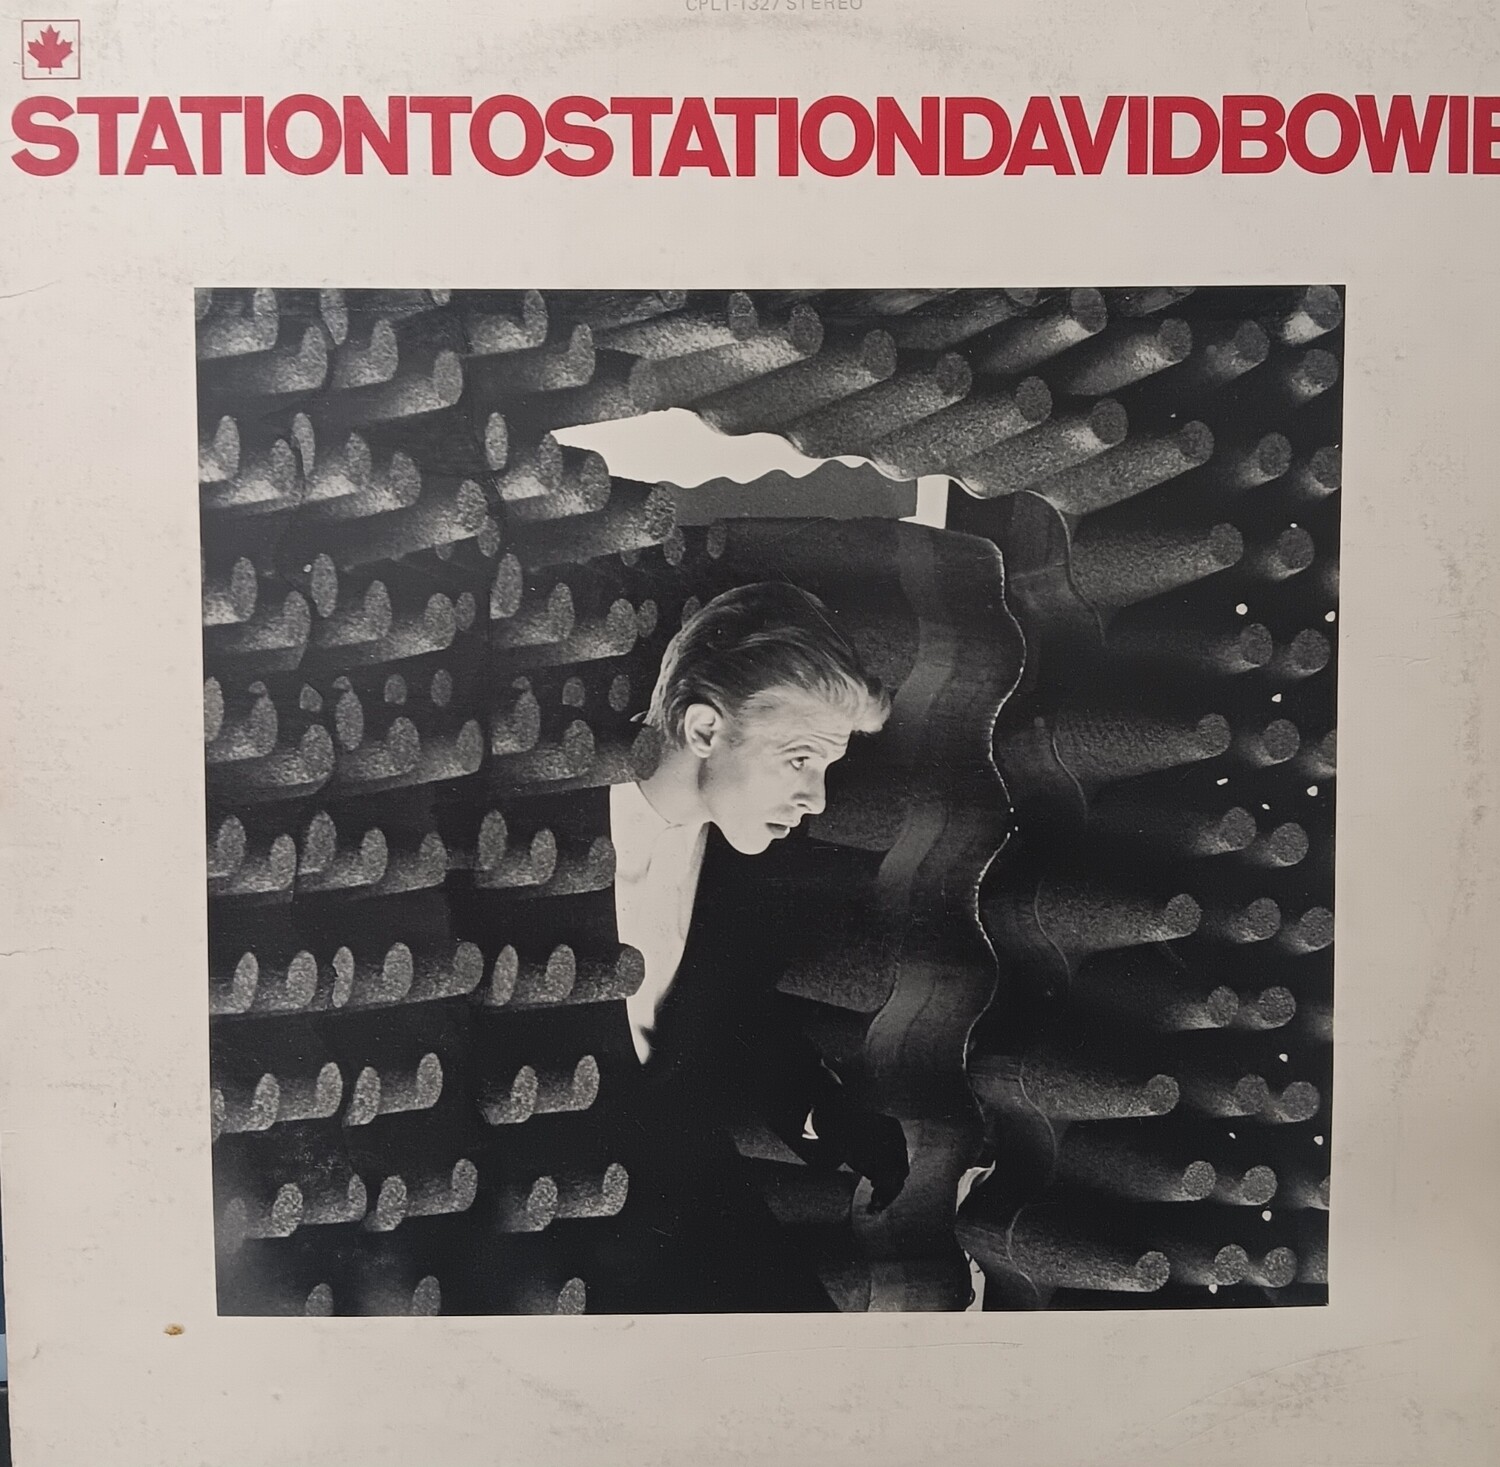 DAVID BOWIE - Station to Station